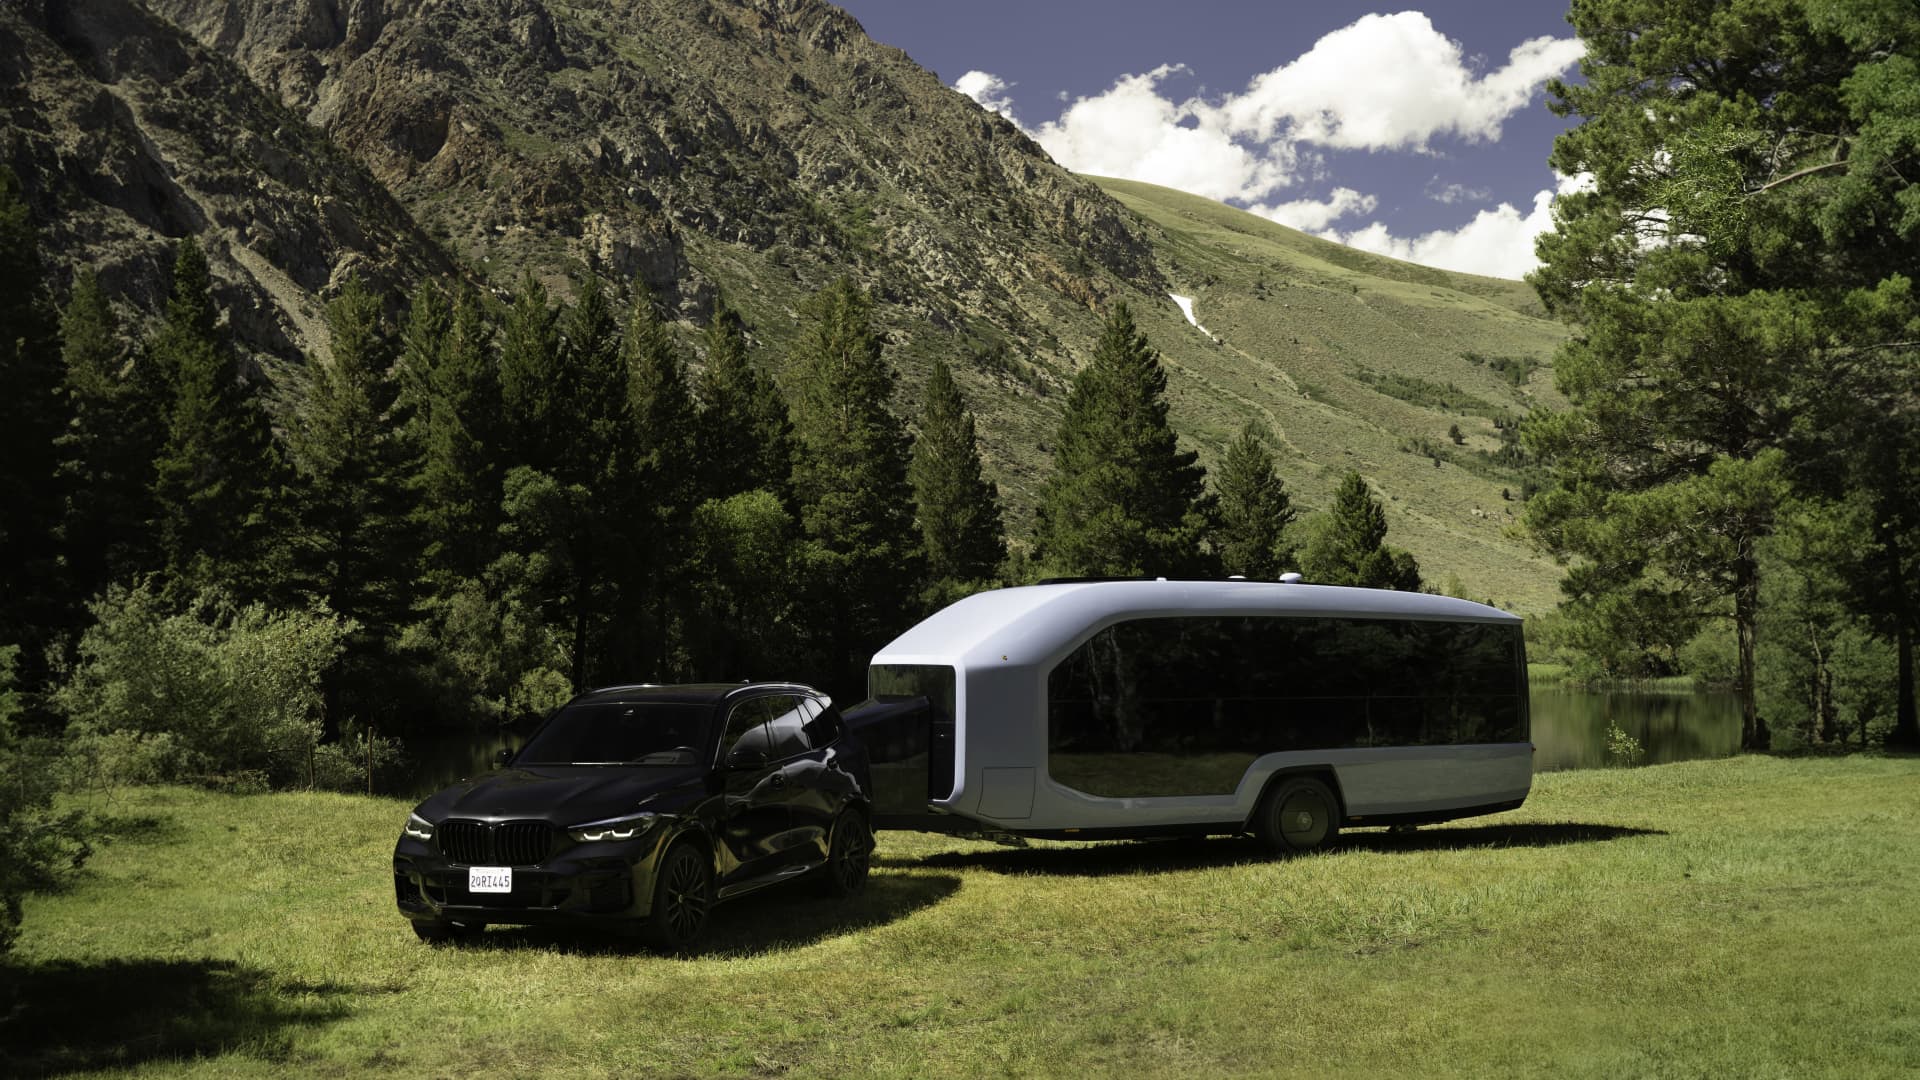 Look inside this startup's self-propelled RV as camping goes electric